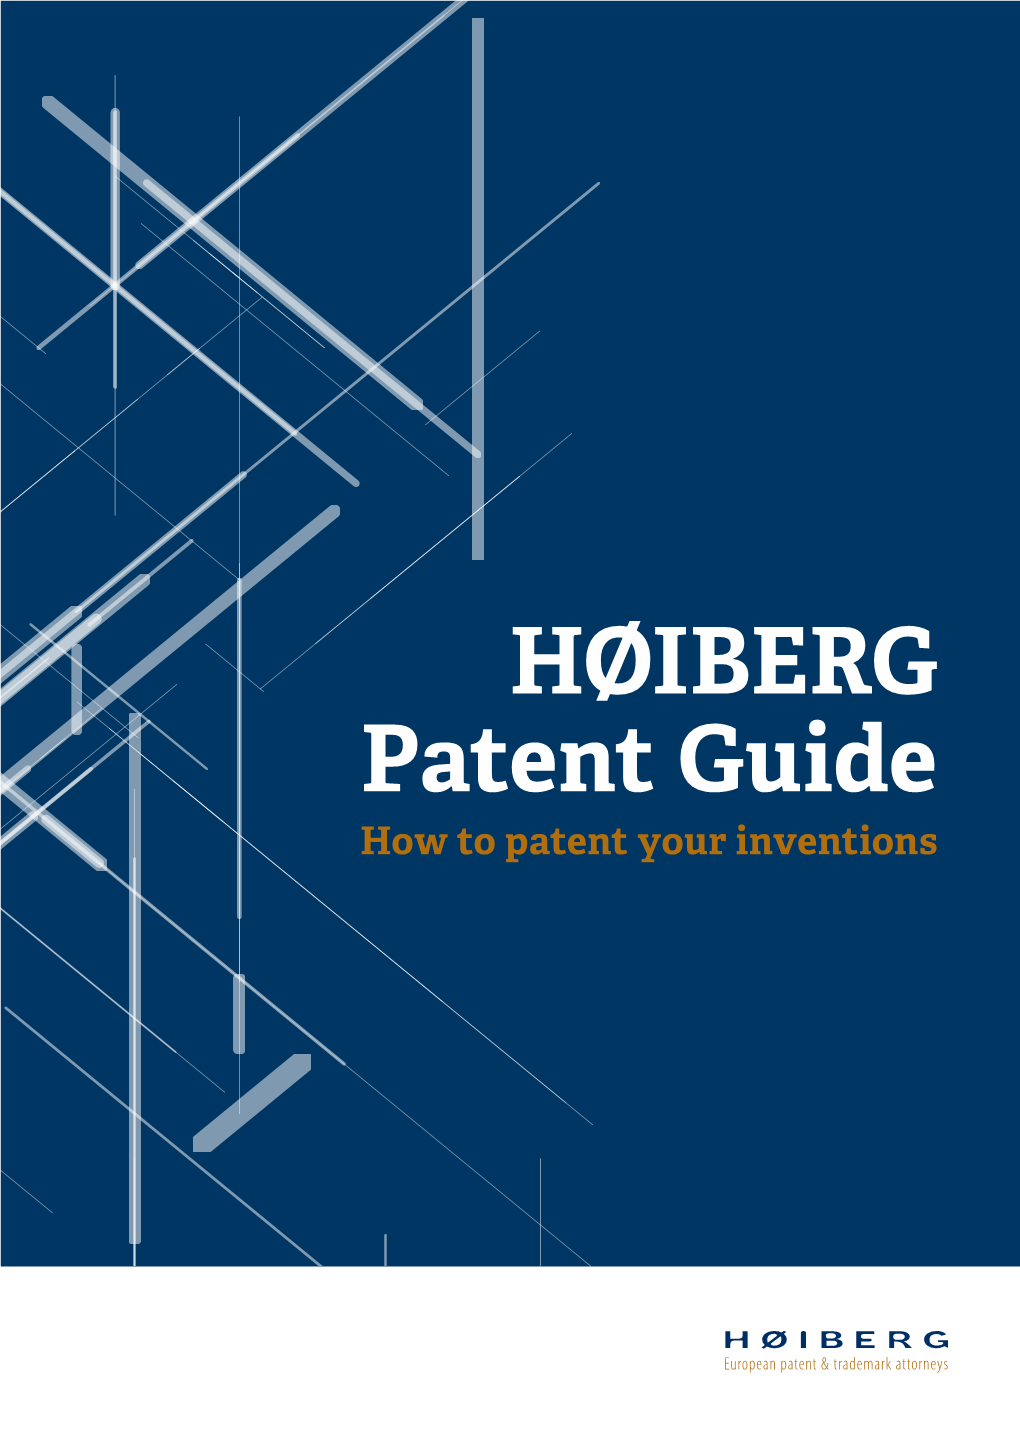 HØIBERG Patent Guide How to Patent Your Inventions IMPRESSUM